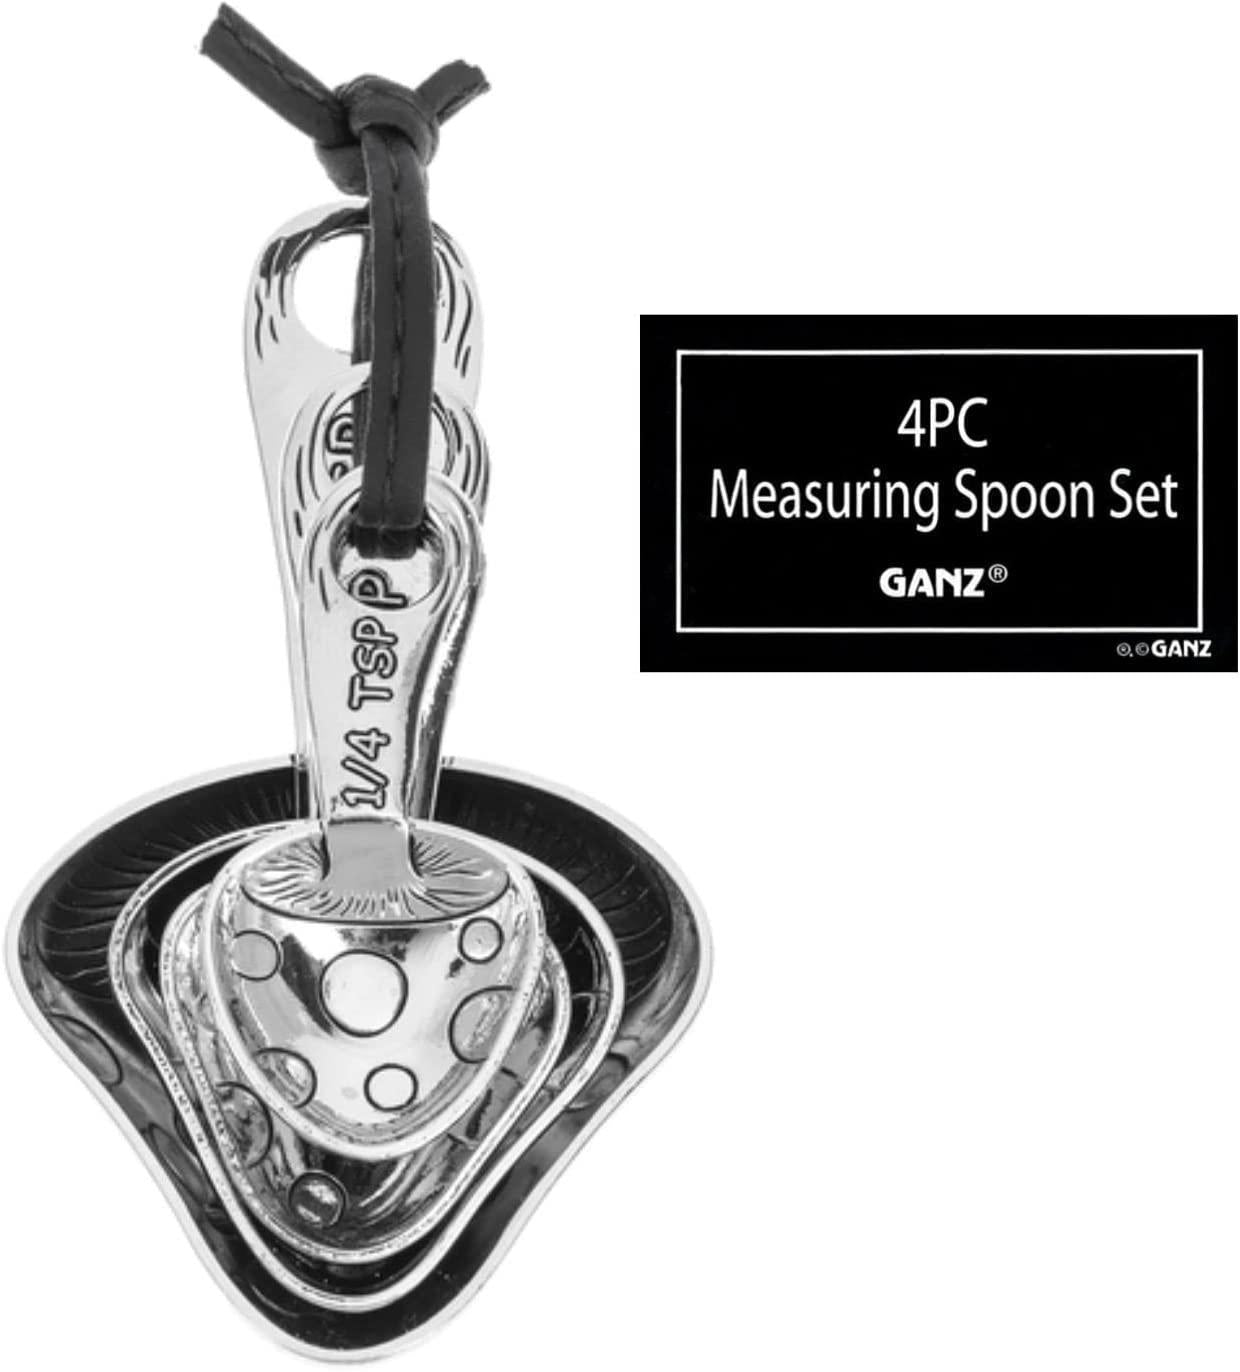 Mushroom Measuring Spoon Ring Set! This set includes four different measuring spoons: 1 TBSP, 1 tsp, 1/2 tsp, and 1/4 tsp. Crafted with intricate mushroom design